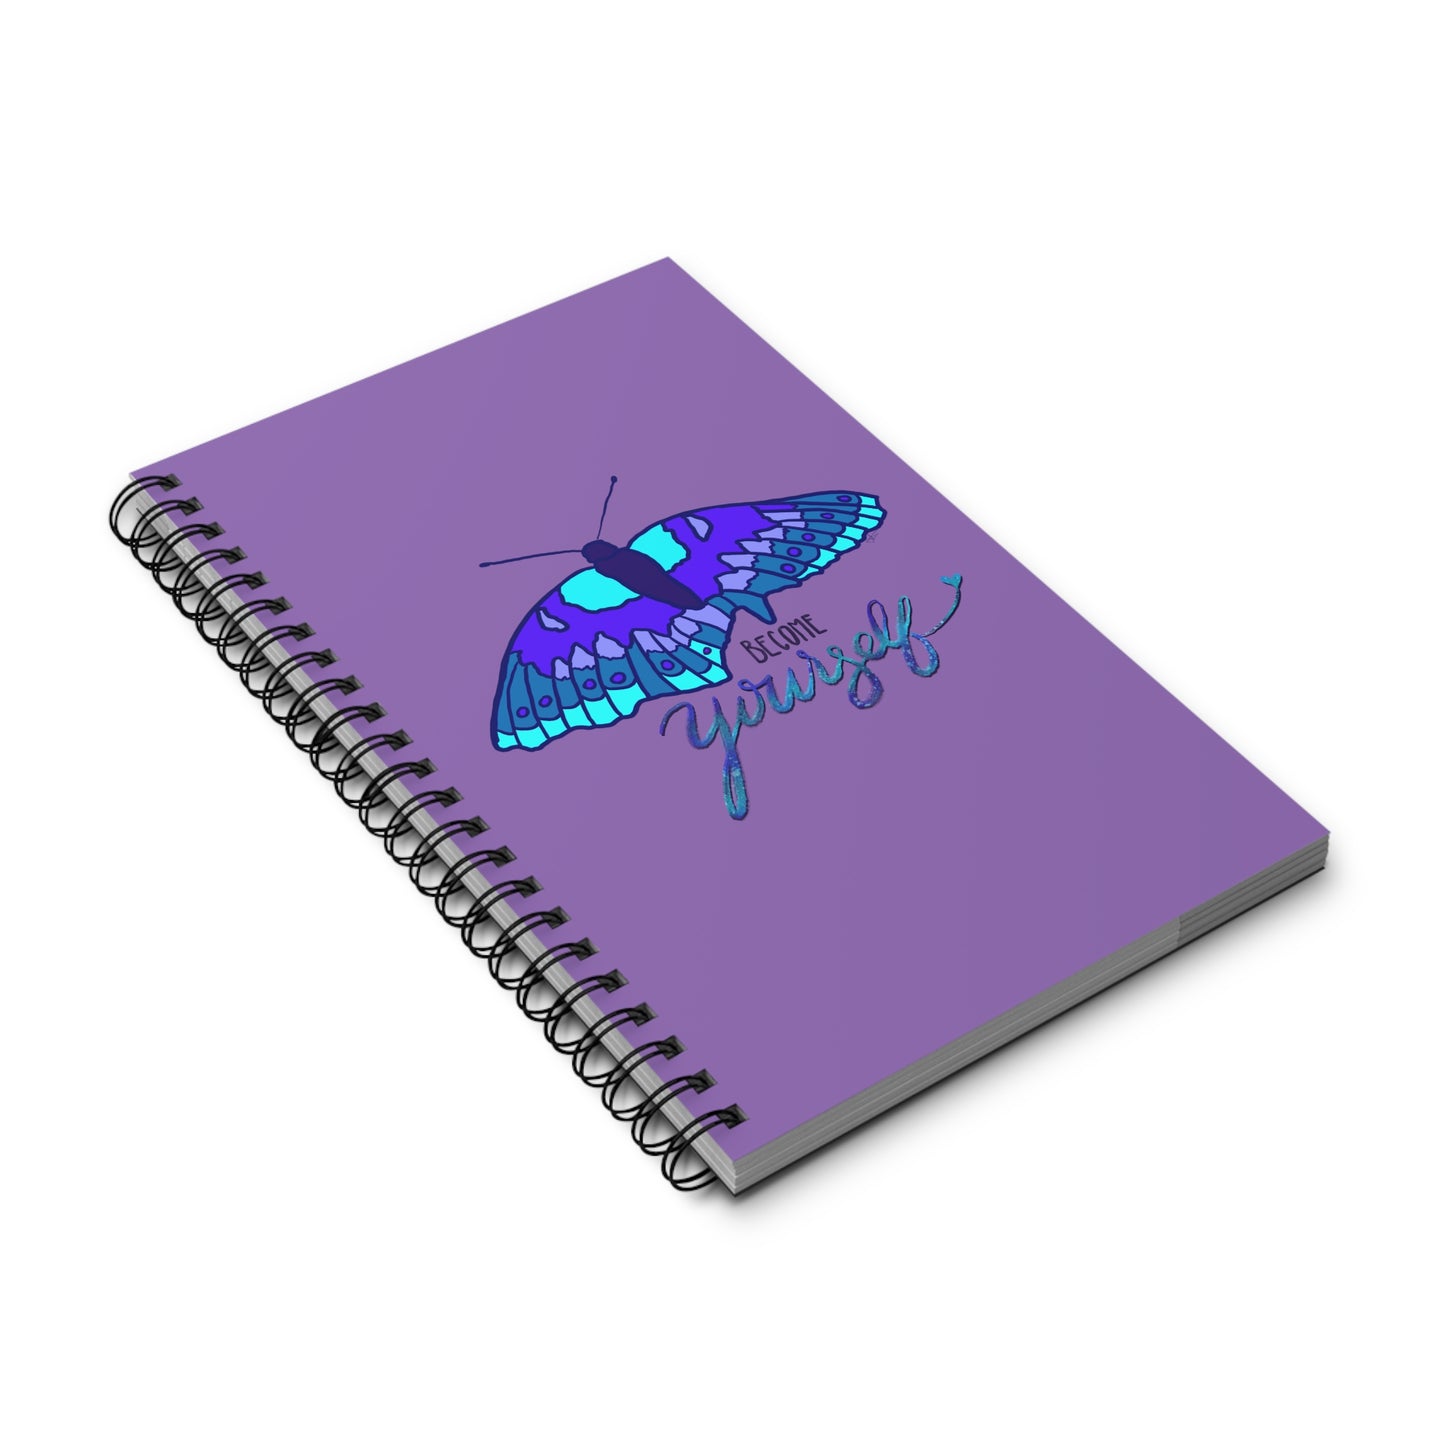 Become Yourself - Spiral Journal (Purple)